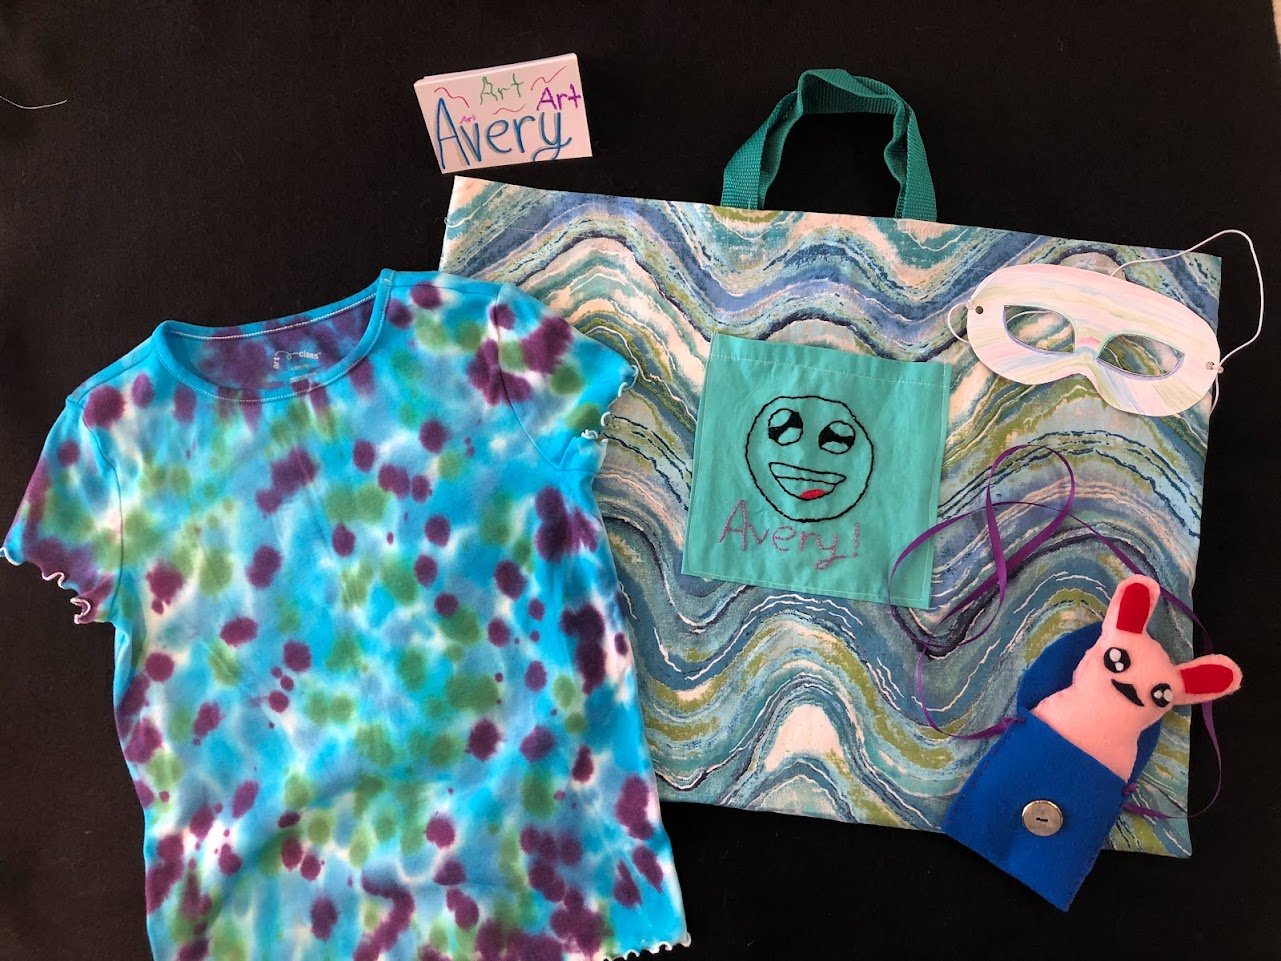 AL's Tie-dye shirt, Tote with embroidered pocket, Pocket Pouch, and Eye Mask